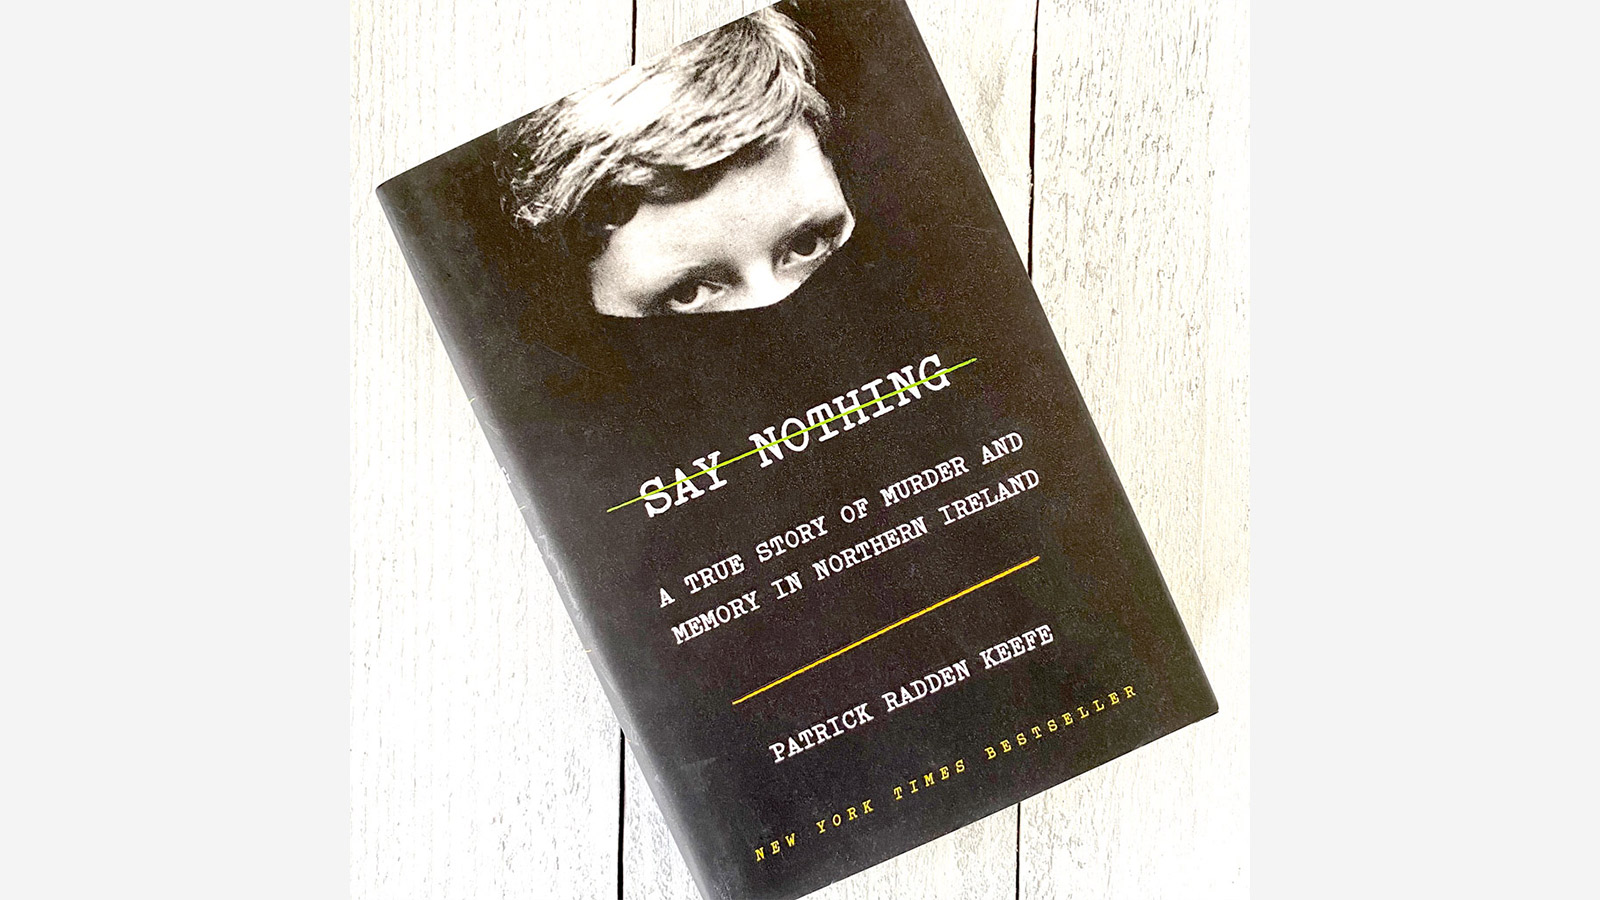 Say Nothing by Patrick Radden Keefe